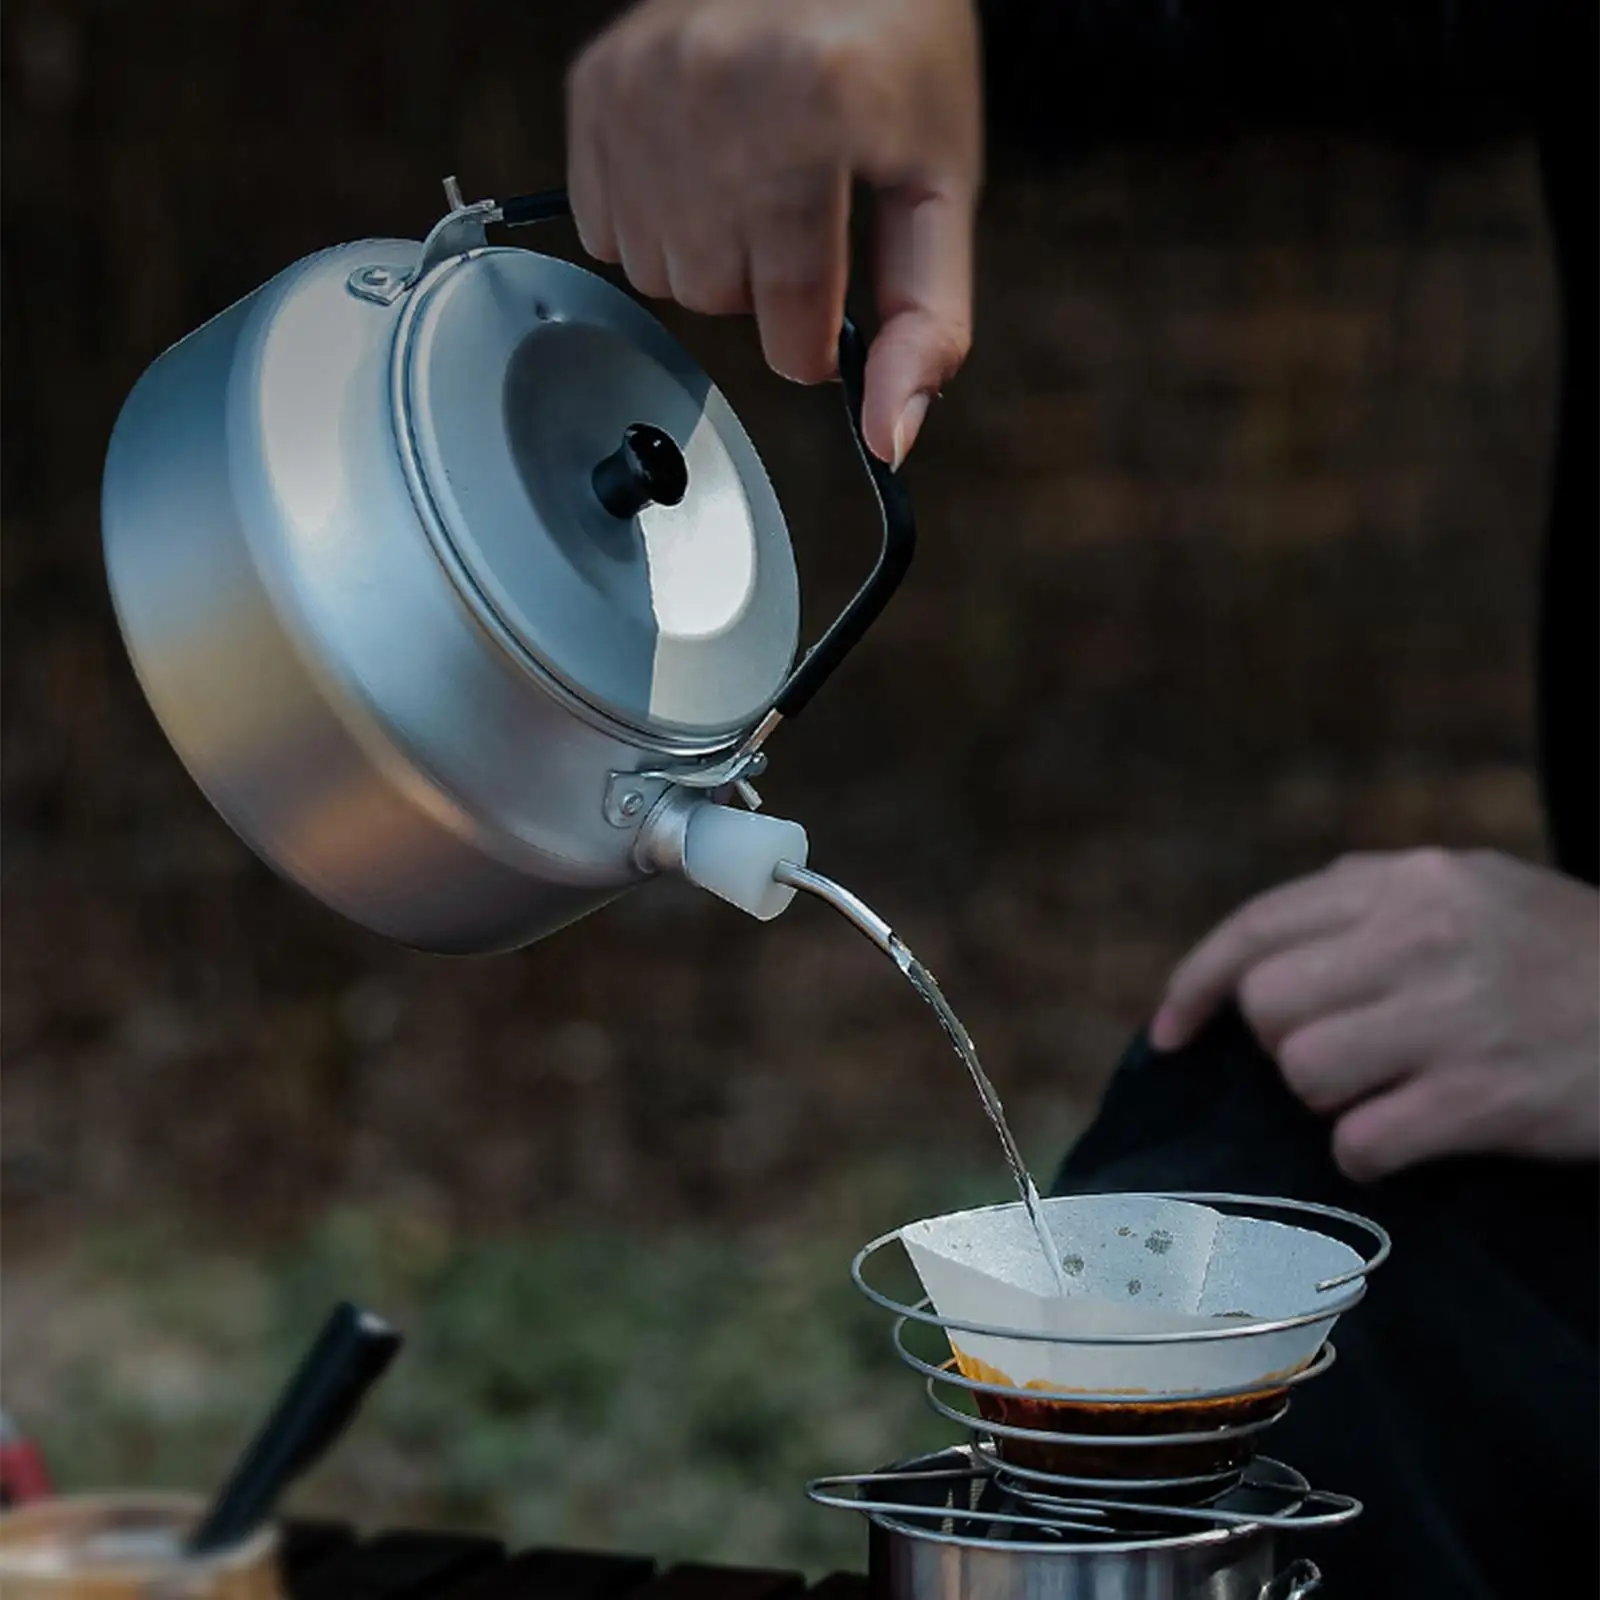 Camping Kettle for Boiling Water Teapot Lightweight with Spout Hiking Picnic